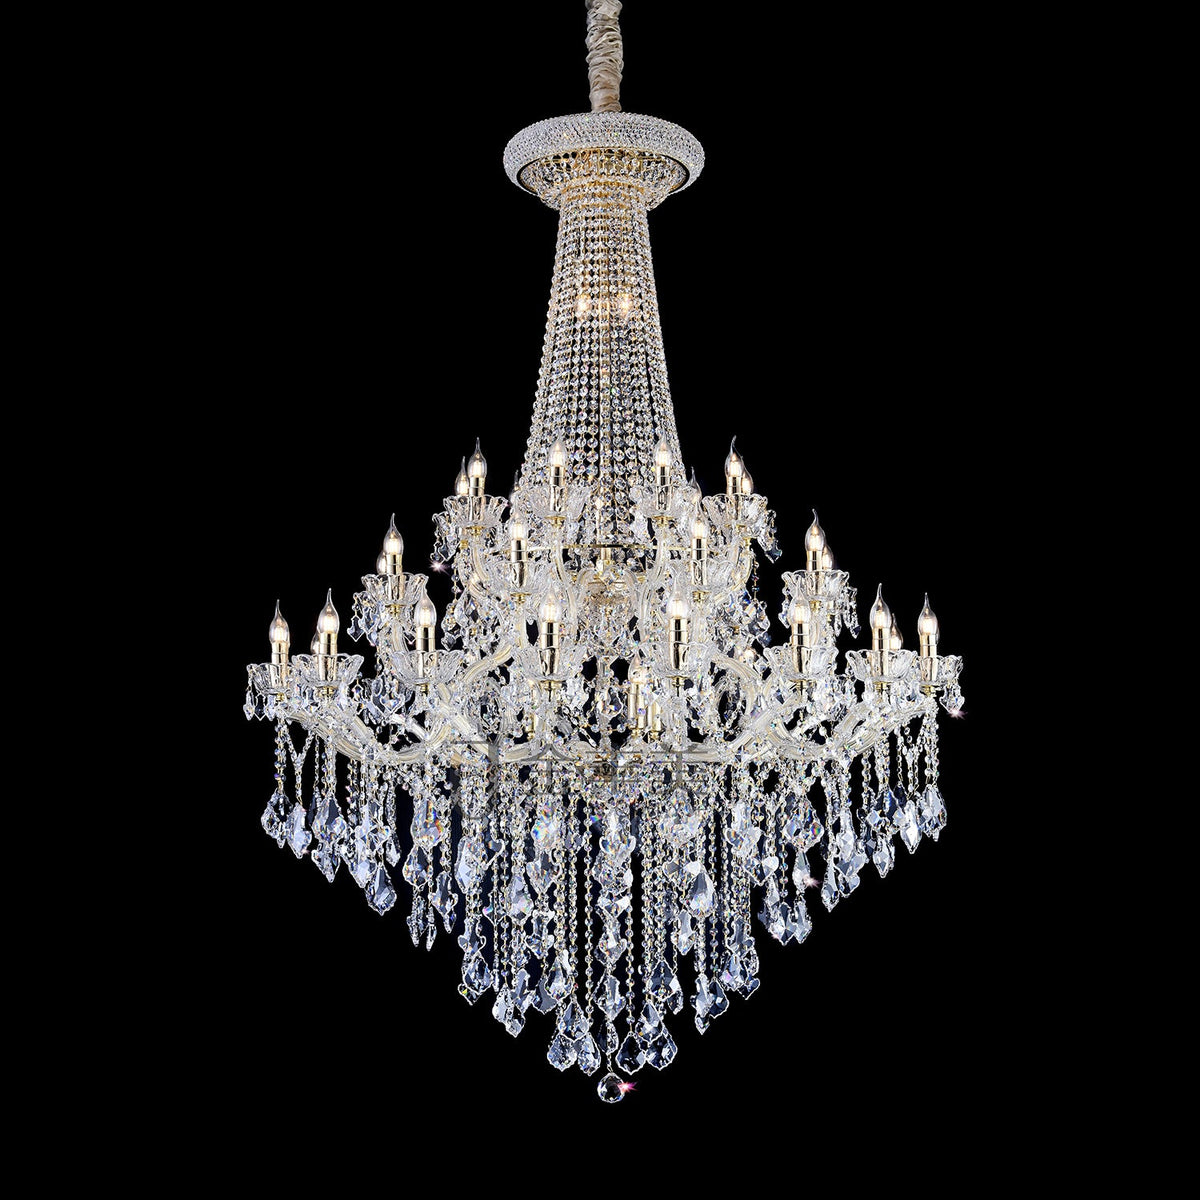 crystal lighting-extra large/oversized/huge foyer canMLe branch crystal chandelier staircase ,hallway,coffee shop/restaurant chandelier clear crystal 